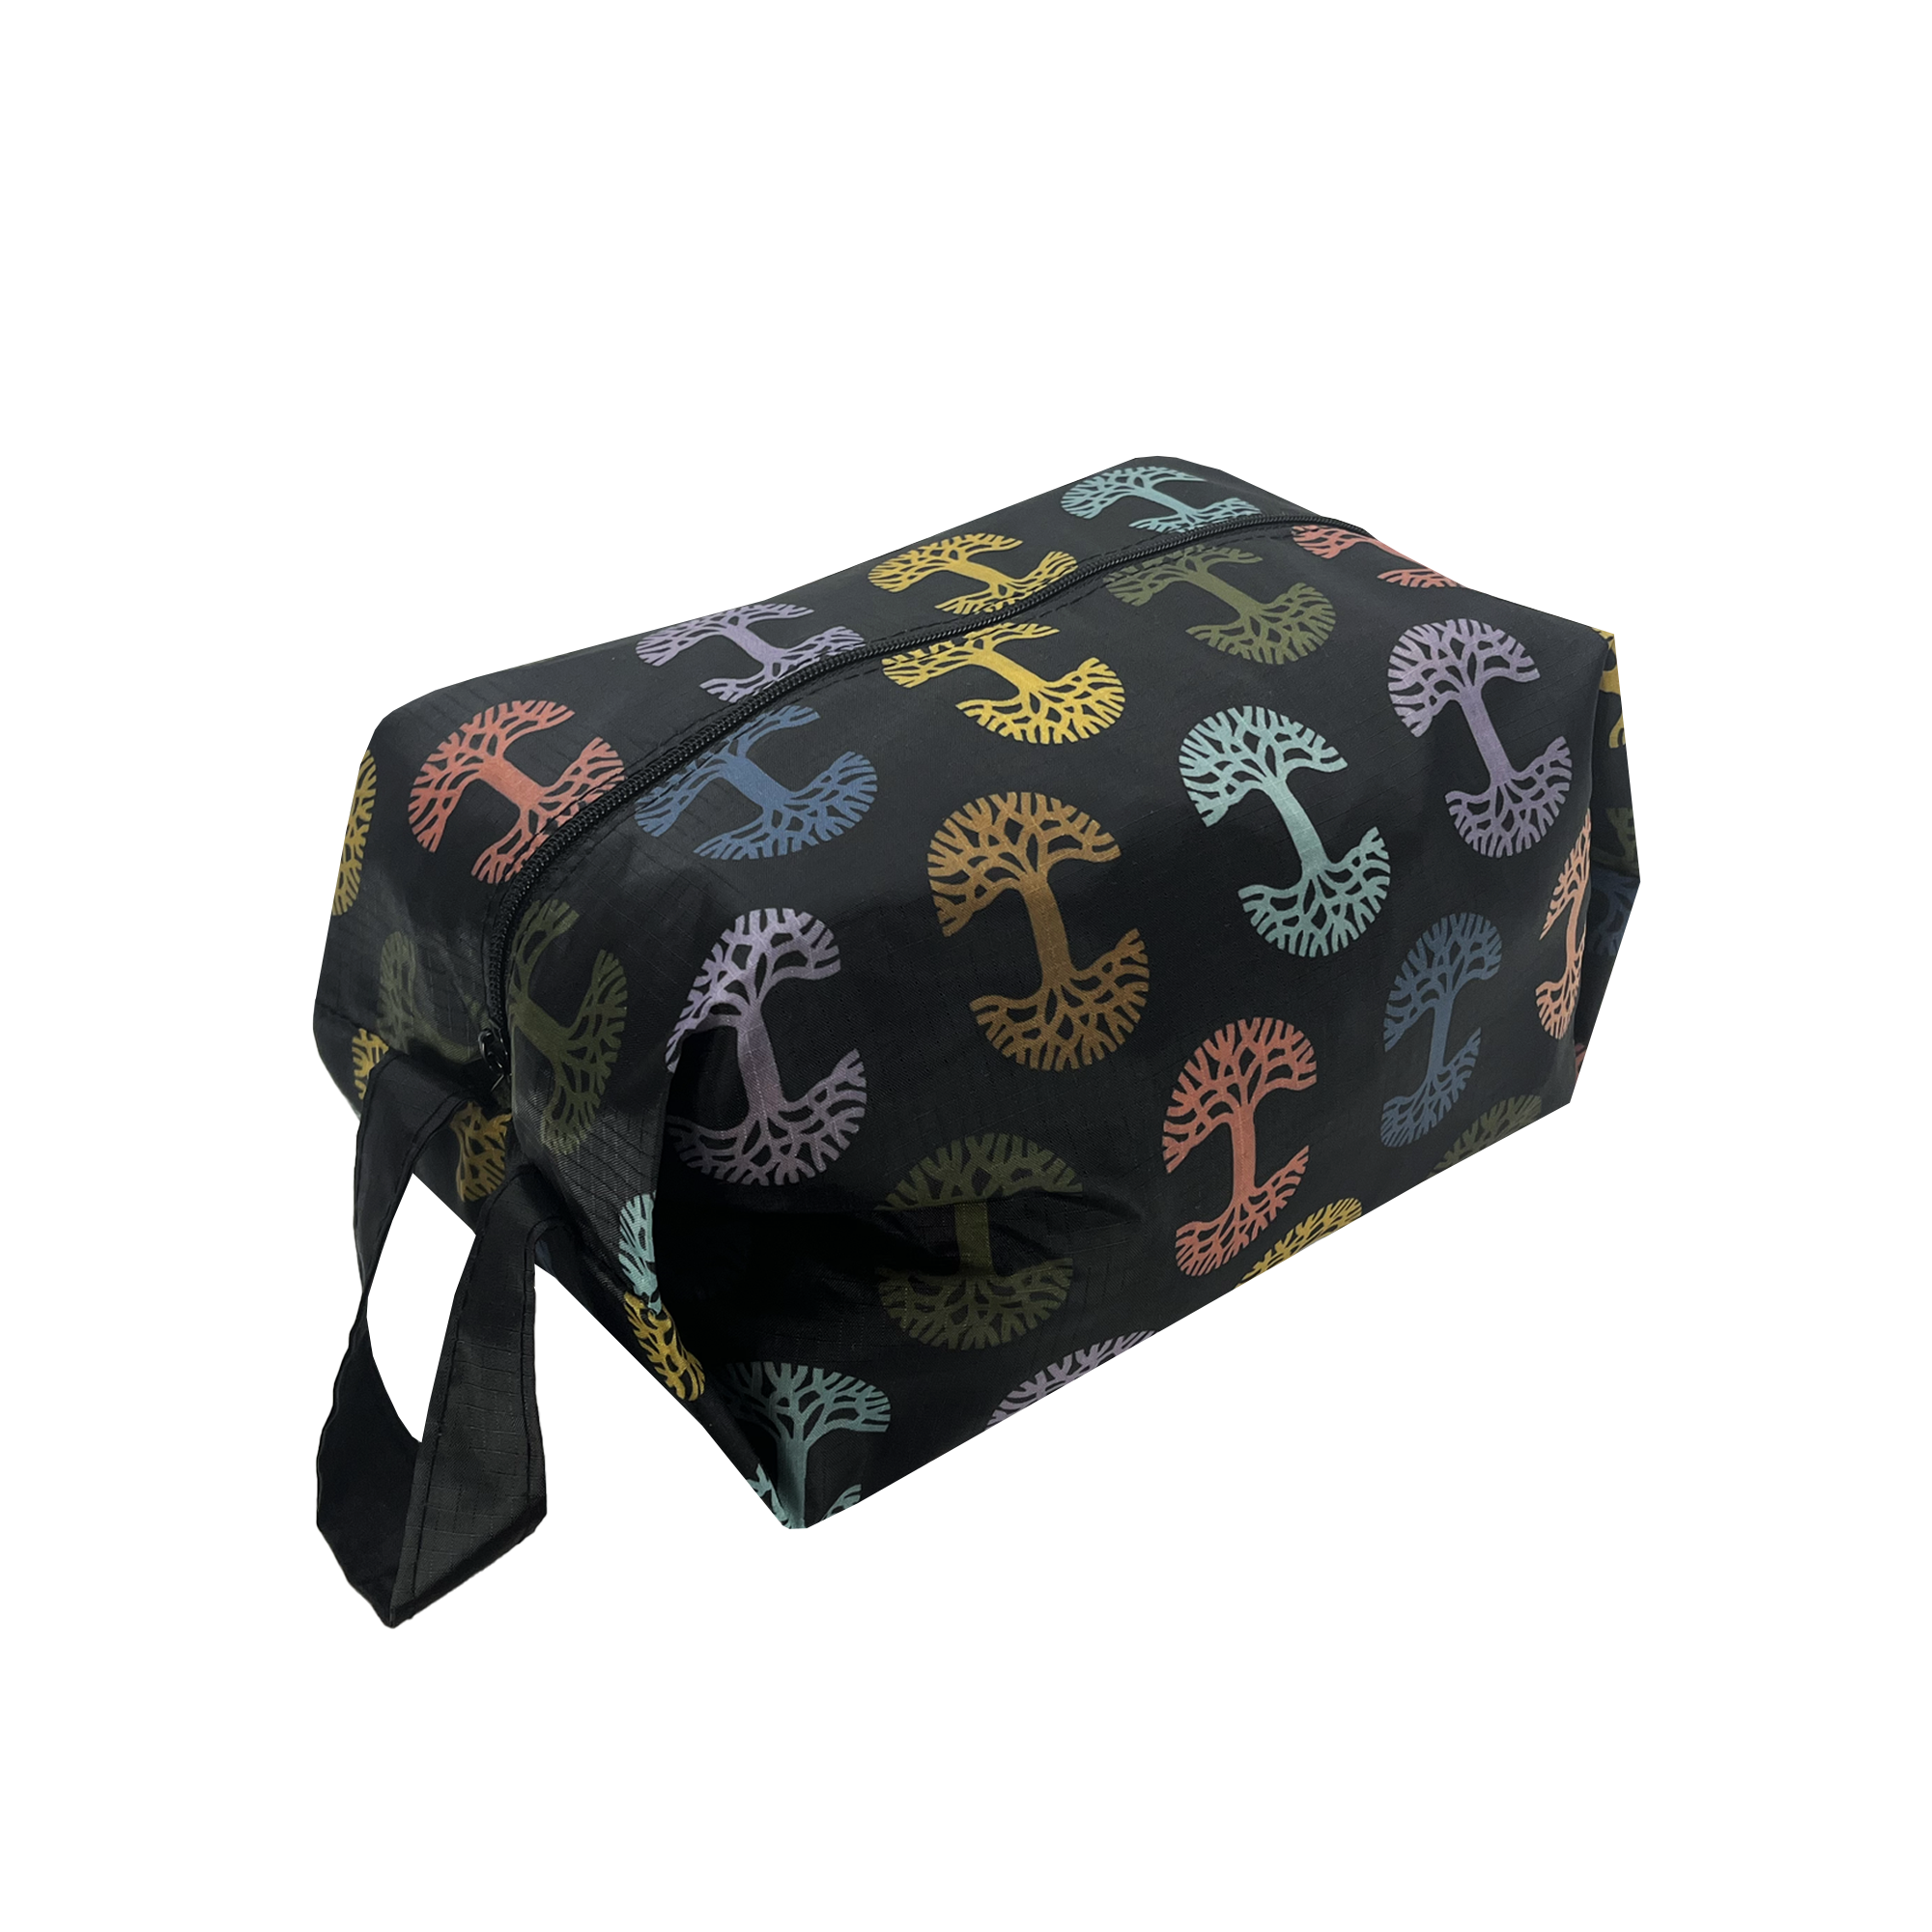 Above is a side-angle view of a medium-sized black zippered toiletry dopp bag with multi-color Oaklandish tree logos on repeat.